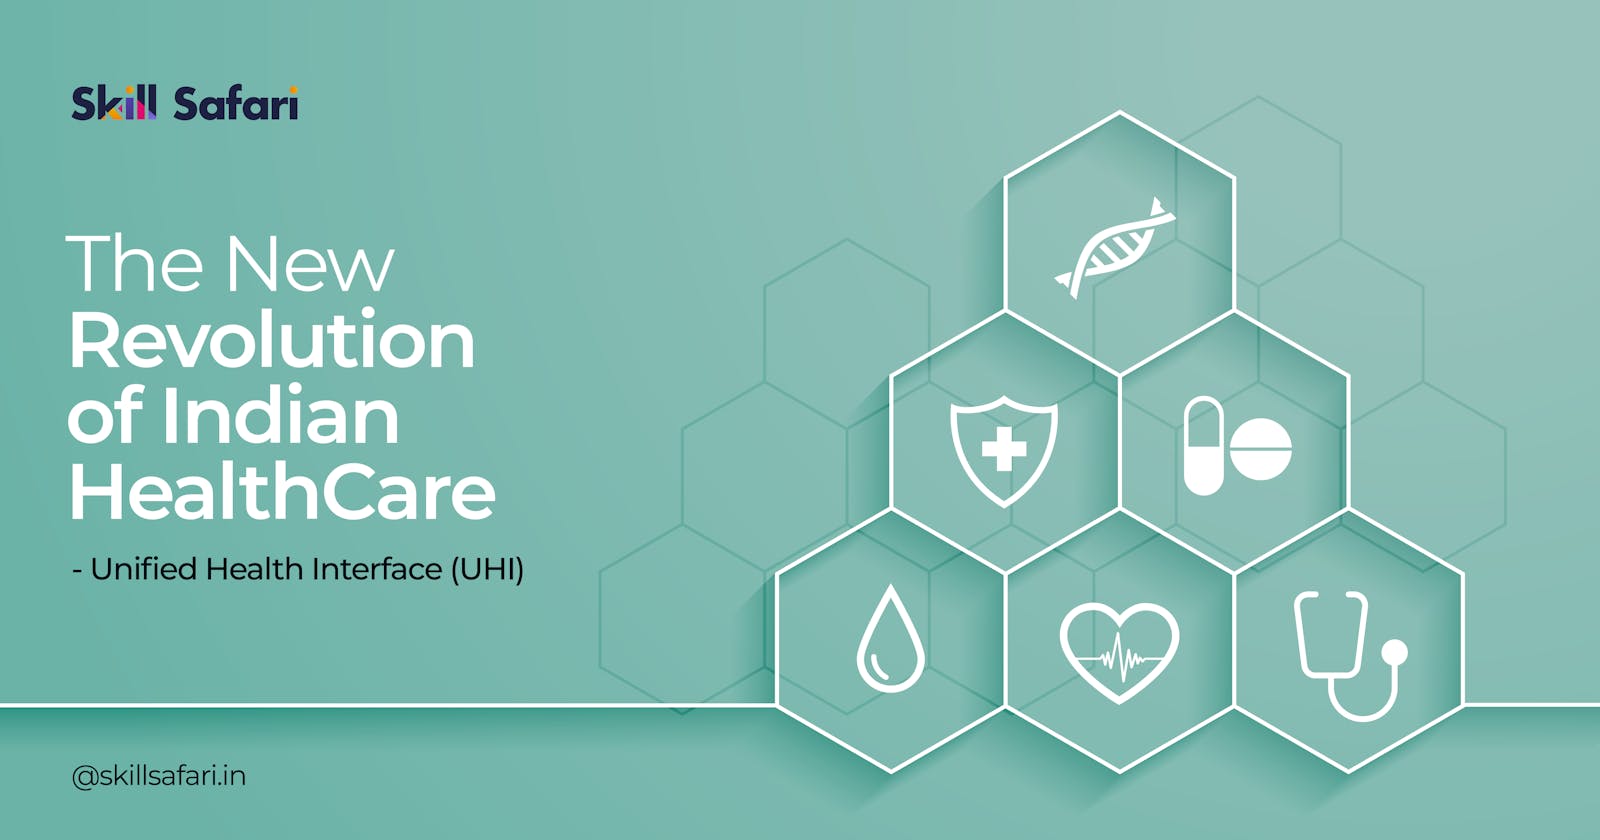 The New Revolution Of Indian HealthCare - Unified Health Interface (UHI)